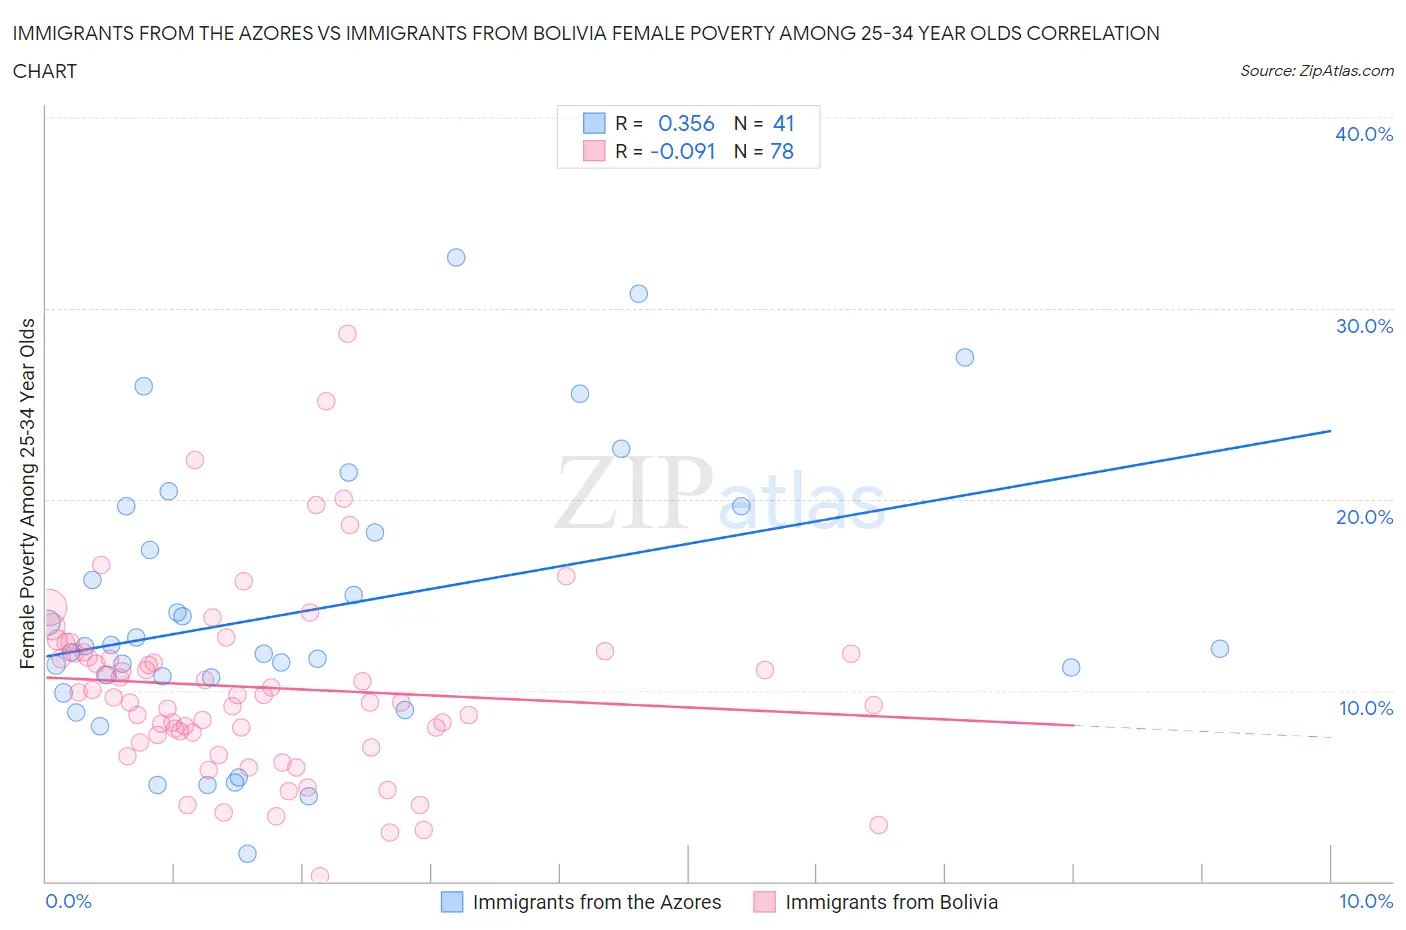 Immigrants from the Azores vs Immigrants from Bolivia Female Poverty Among 25-34 Year Olds